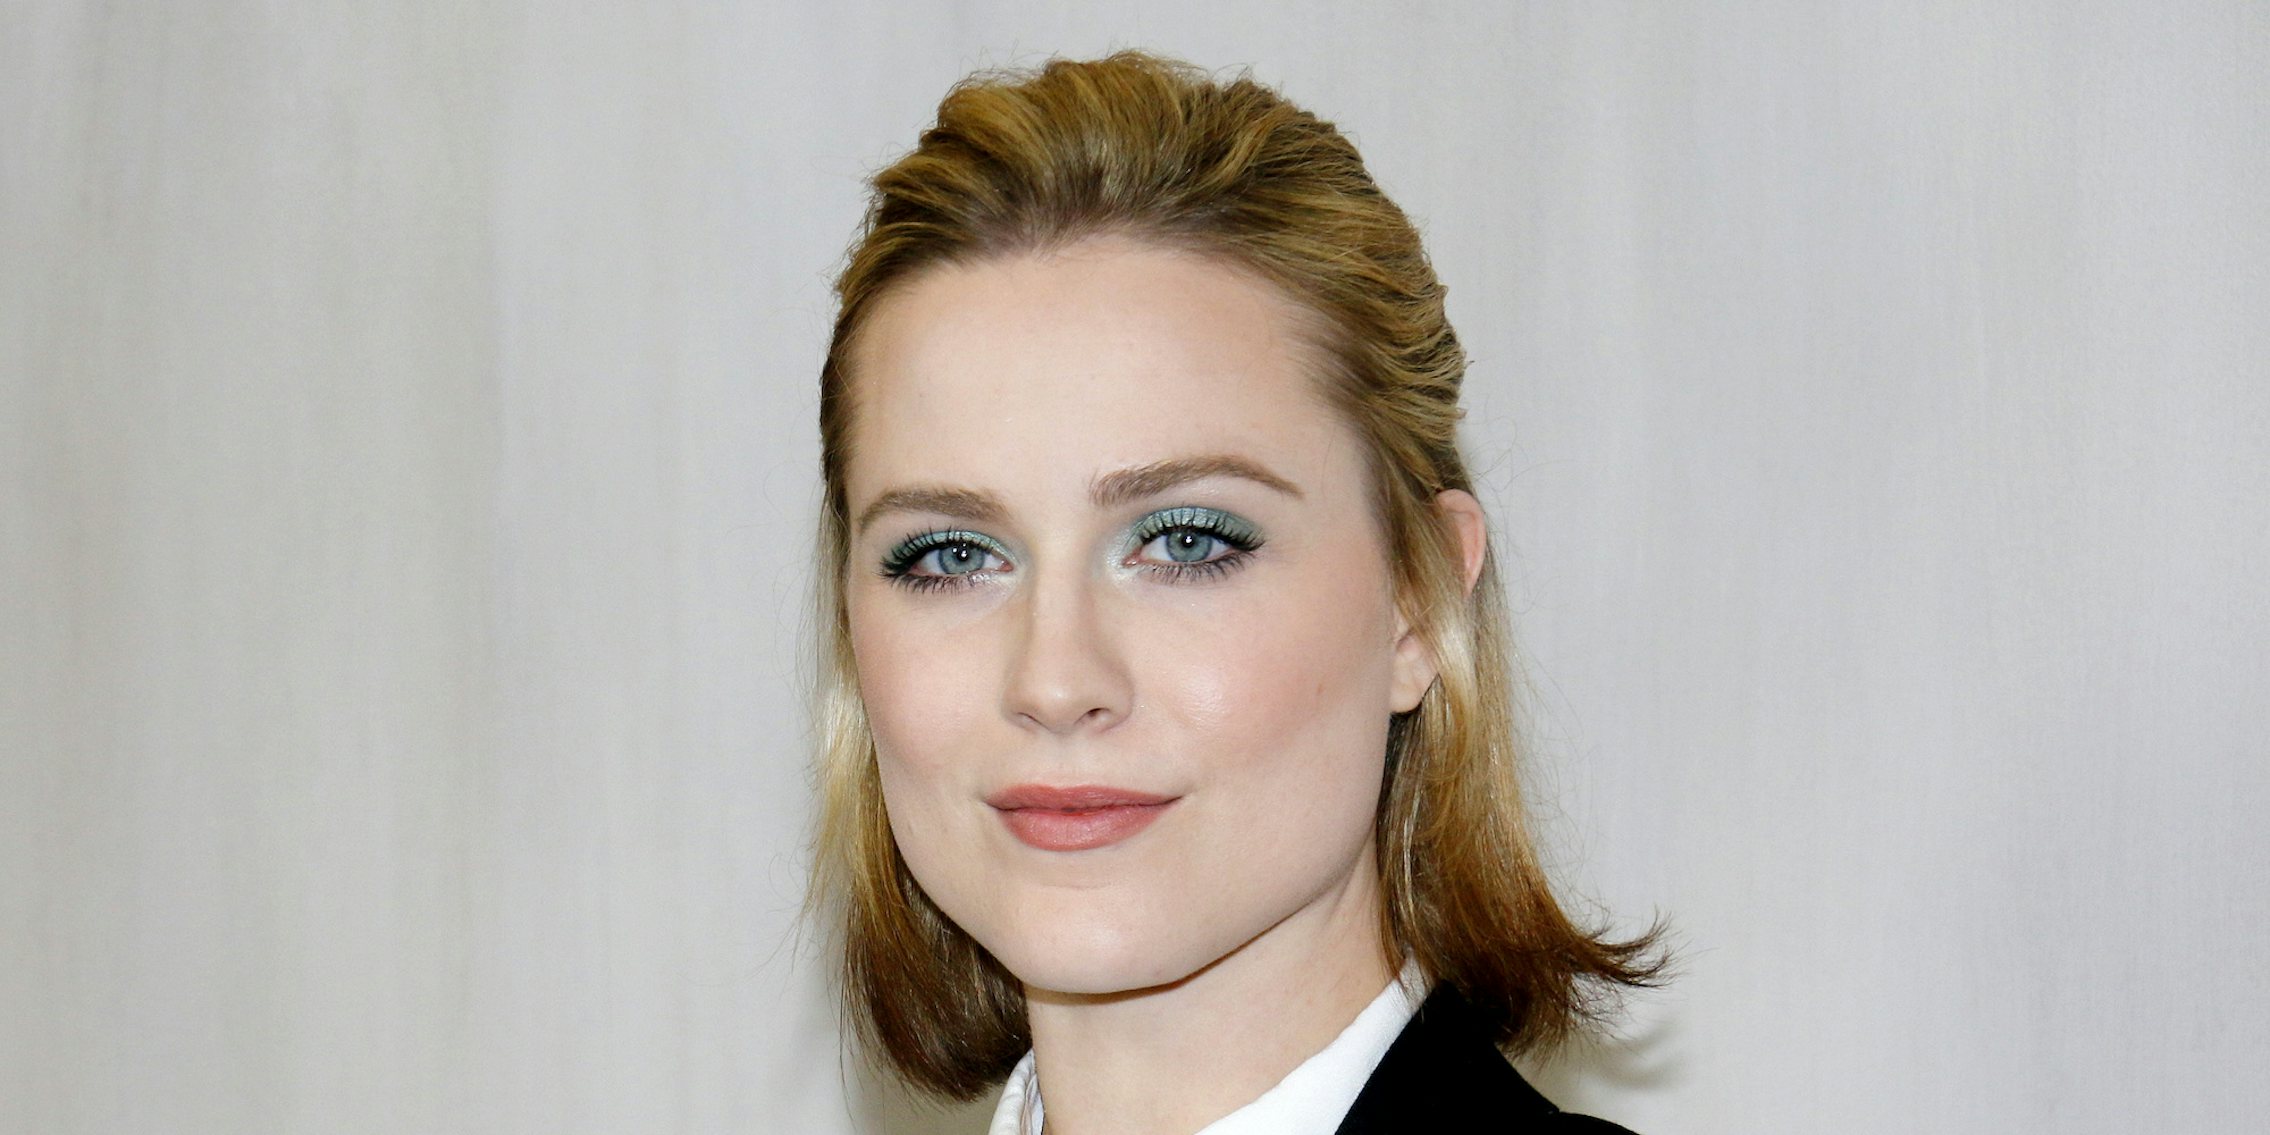 Photo of Evan Rachel Wood, one of the women who accused musician Marilyn Manson of abuse.